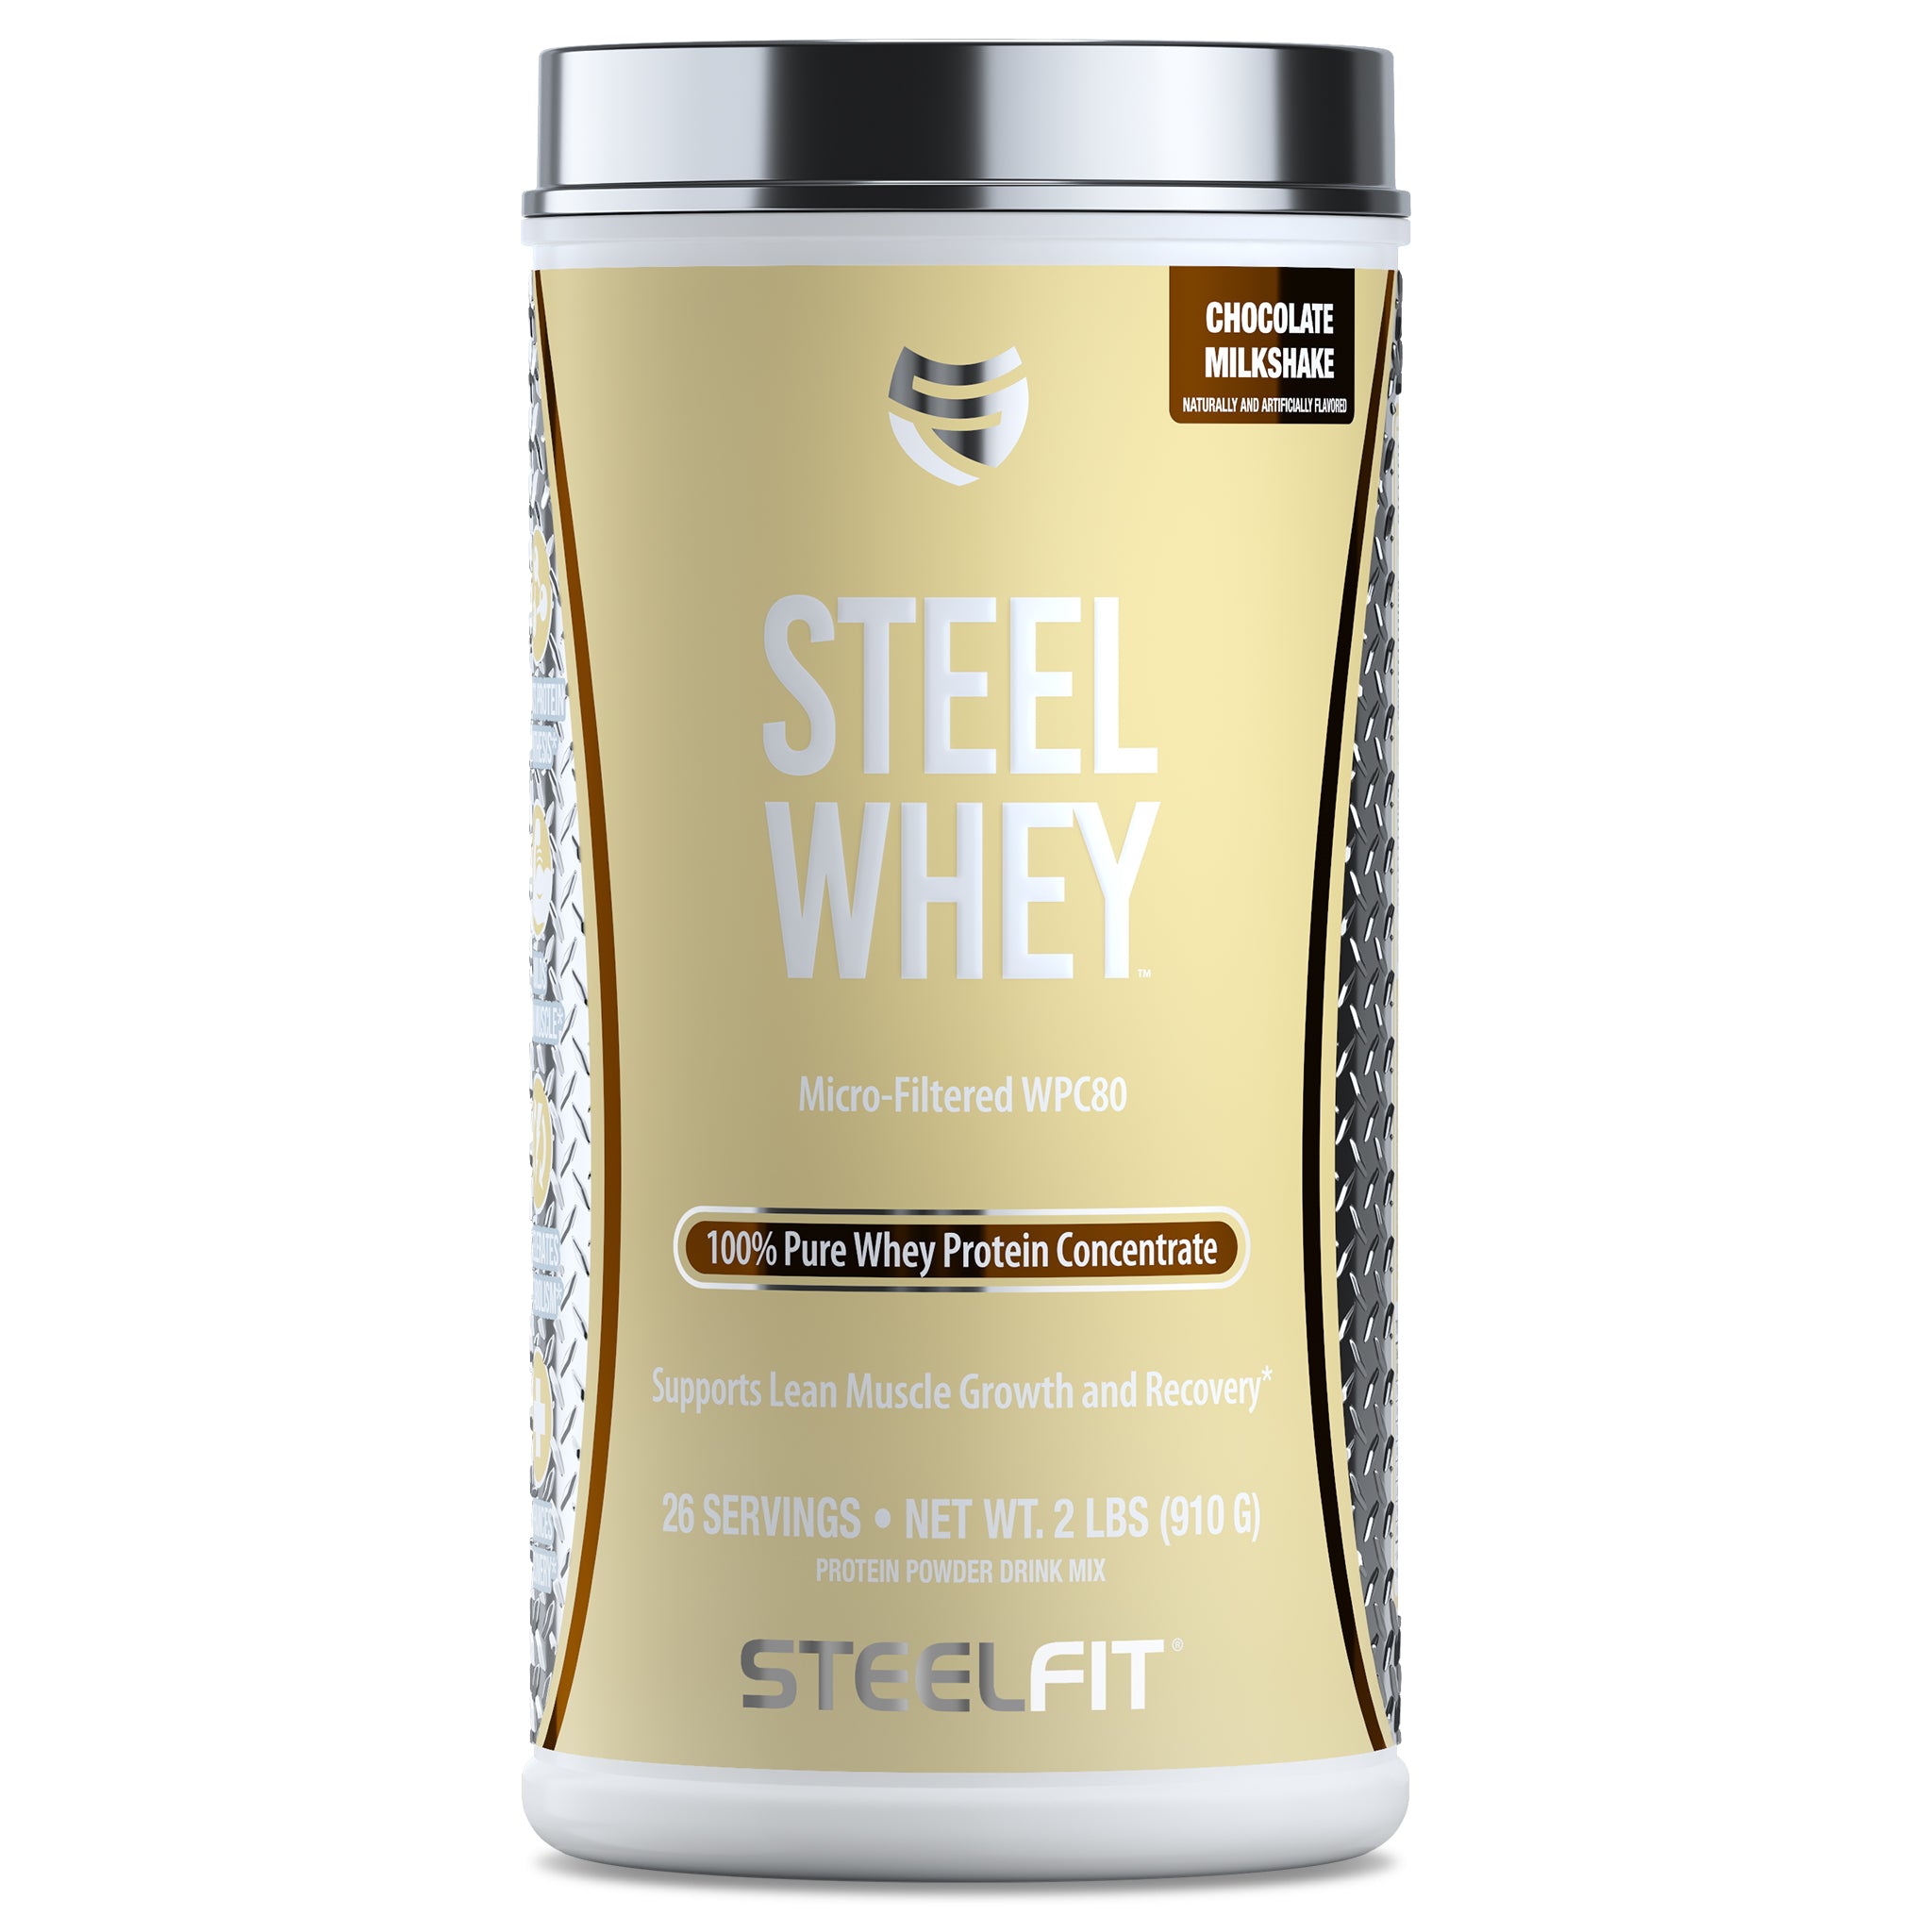 Whey Protein 80 Review  The Protein Works Protein Powder